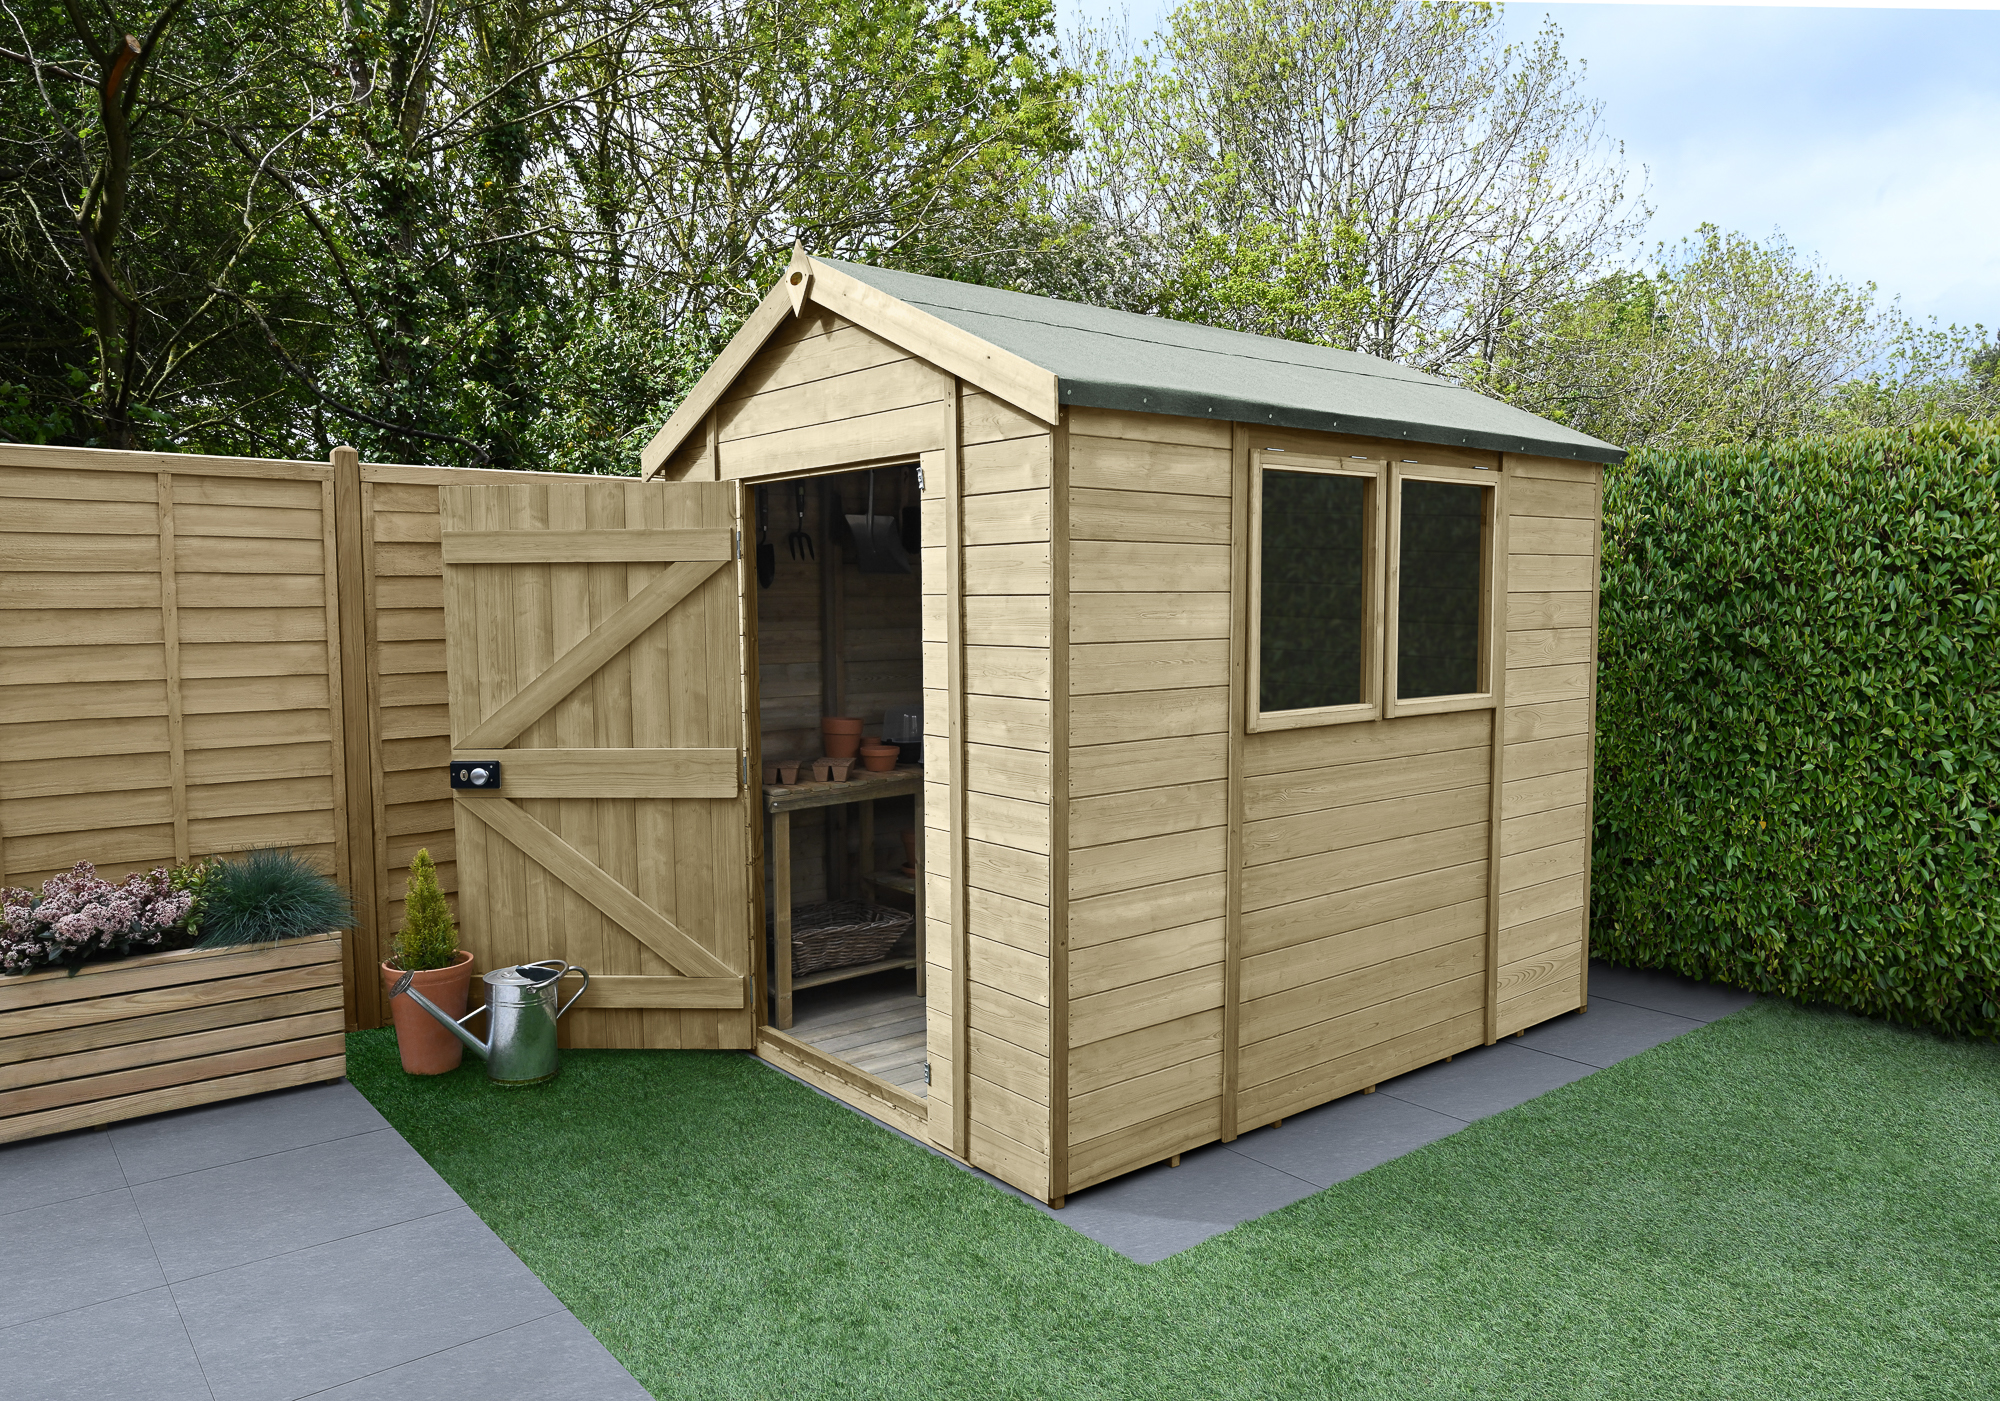 Forest Garden Timberdale 8fx 6ft Apex Shed with Base